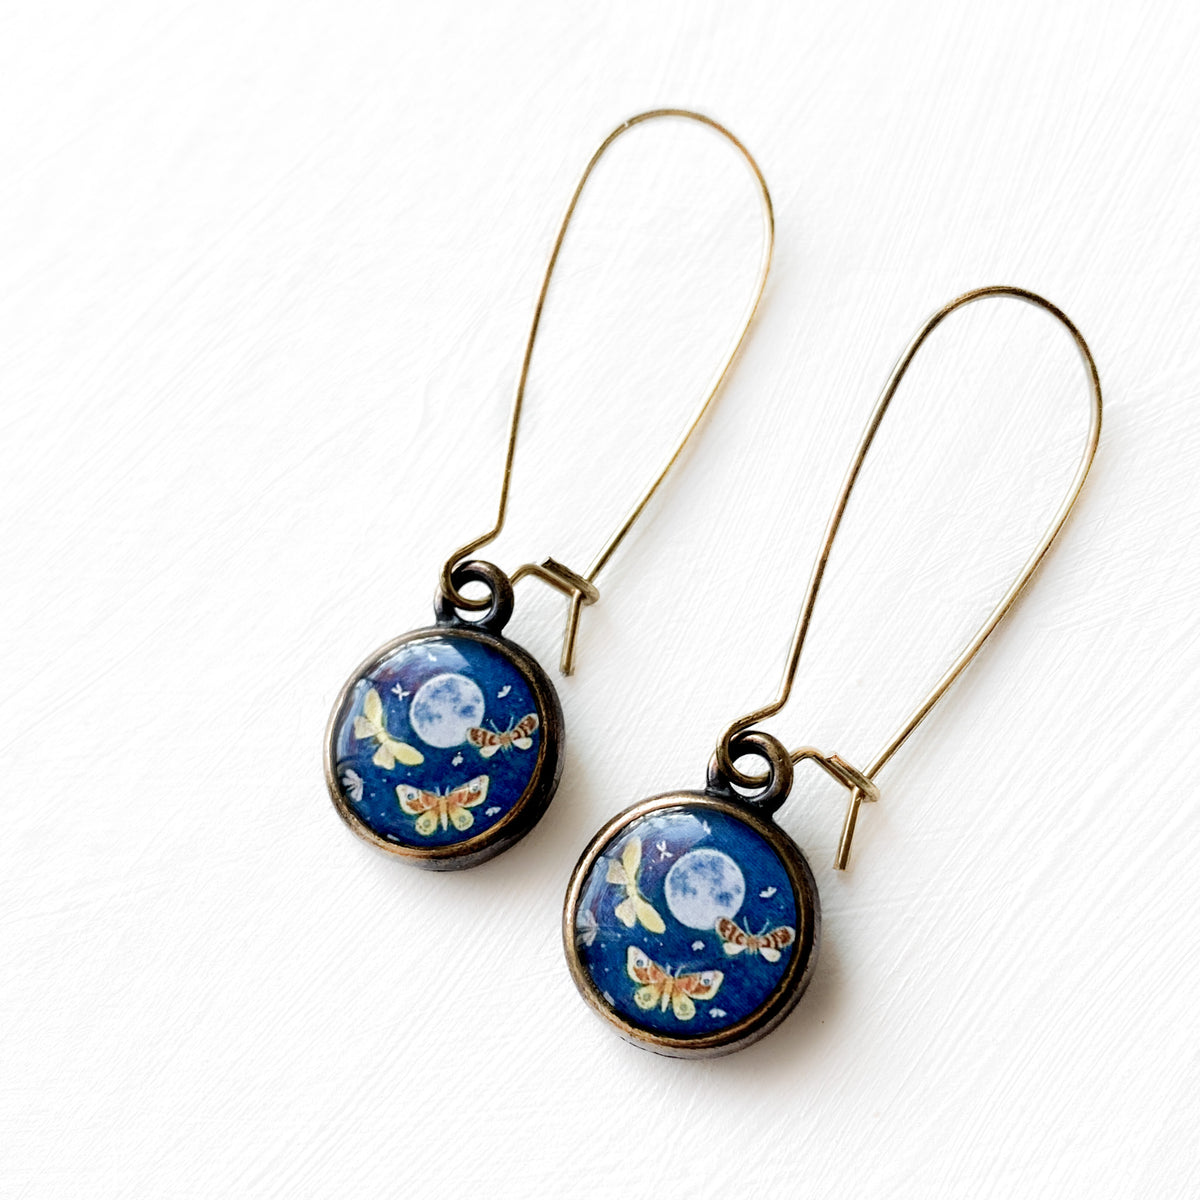 a pair of earrings with a butterfly design on them